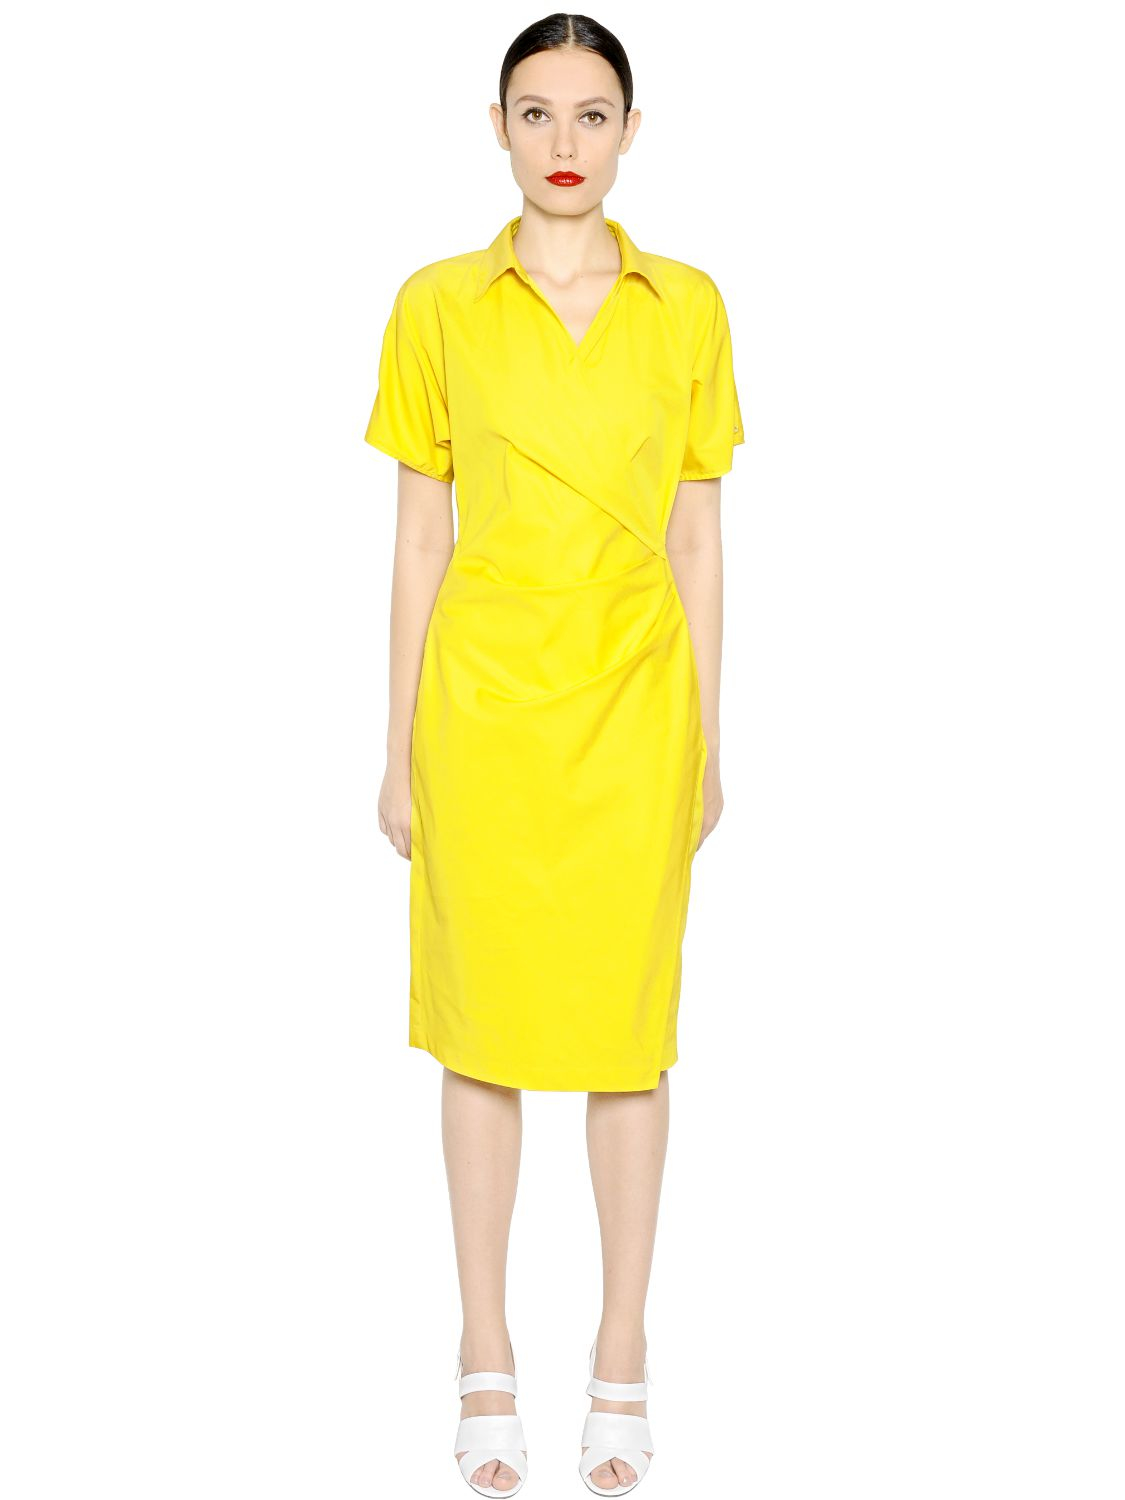 Lyst - Max Mara Fred Cotton Dress in Yellow